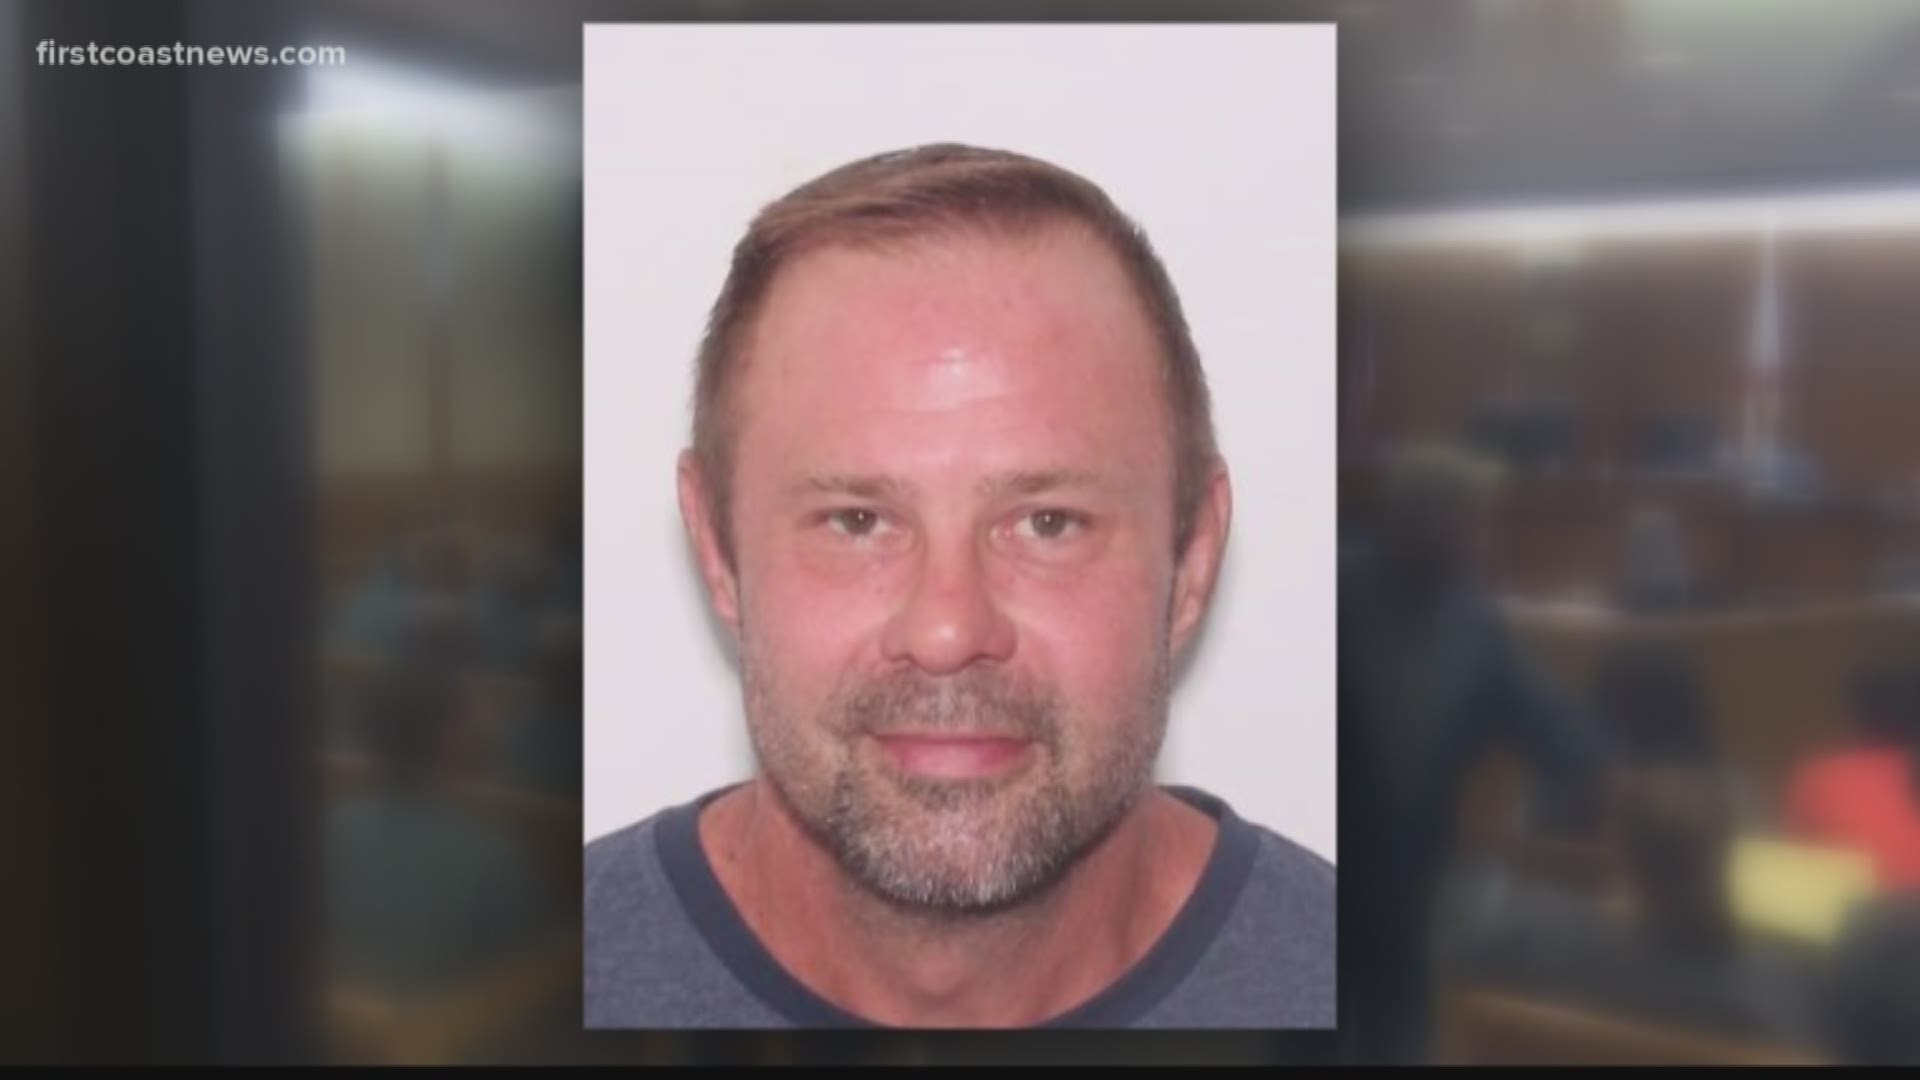 St. Johns County investigators are looking for anyone who may have hired Corey Binderim after receiving reports of "grand theft by construction fraud."